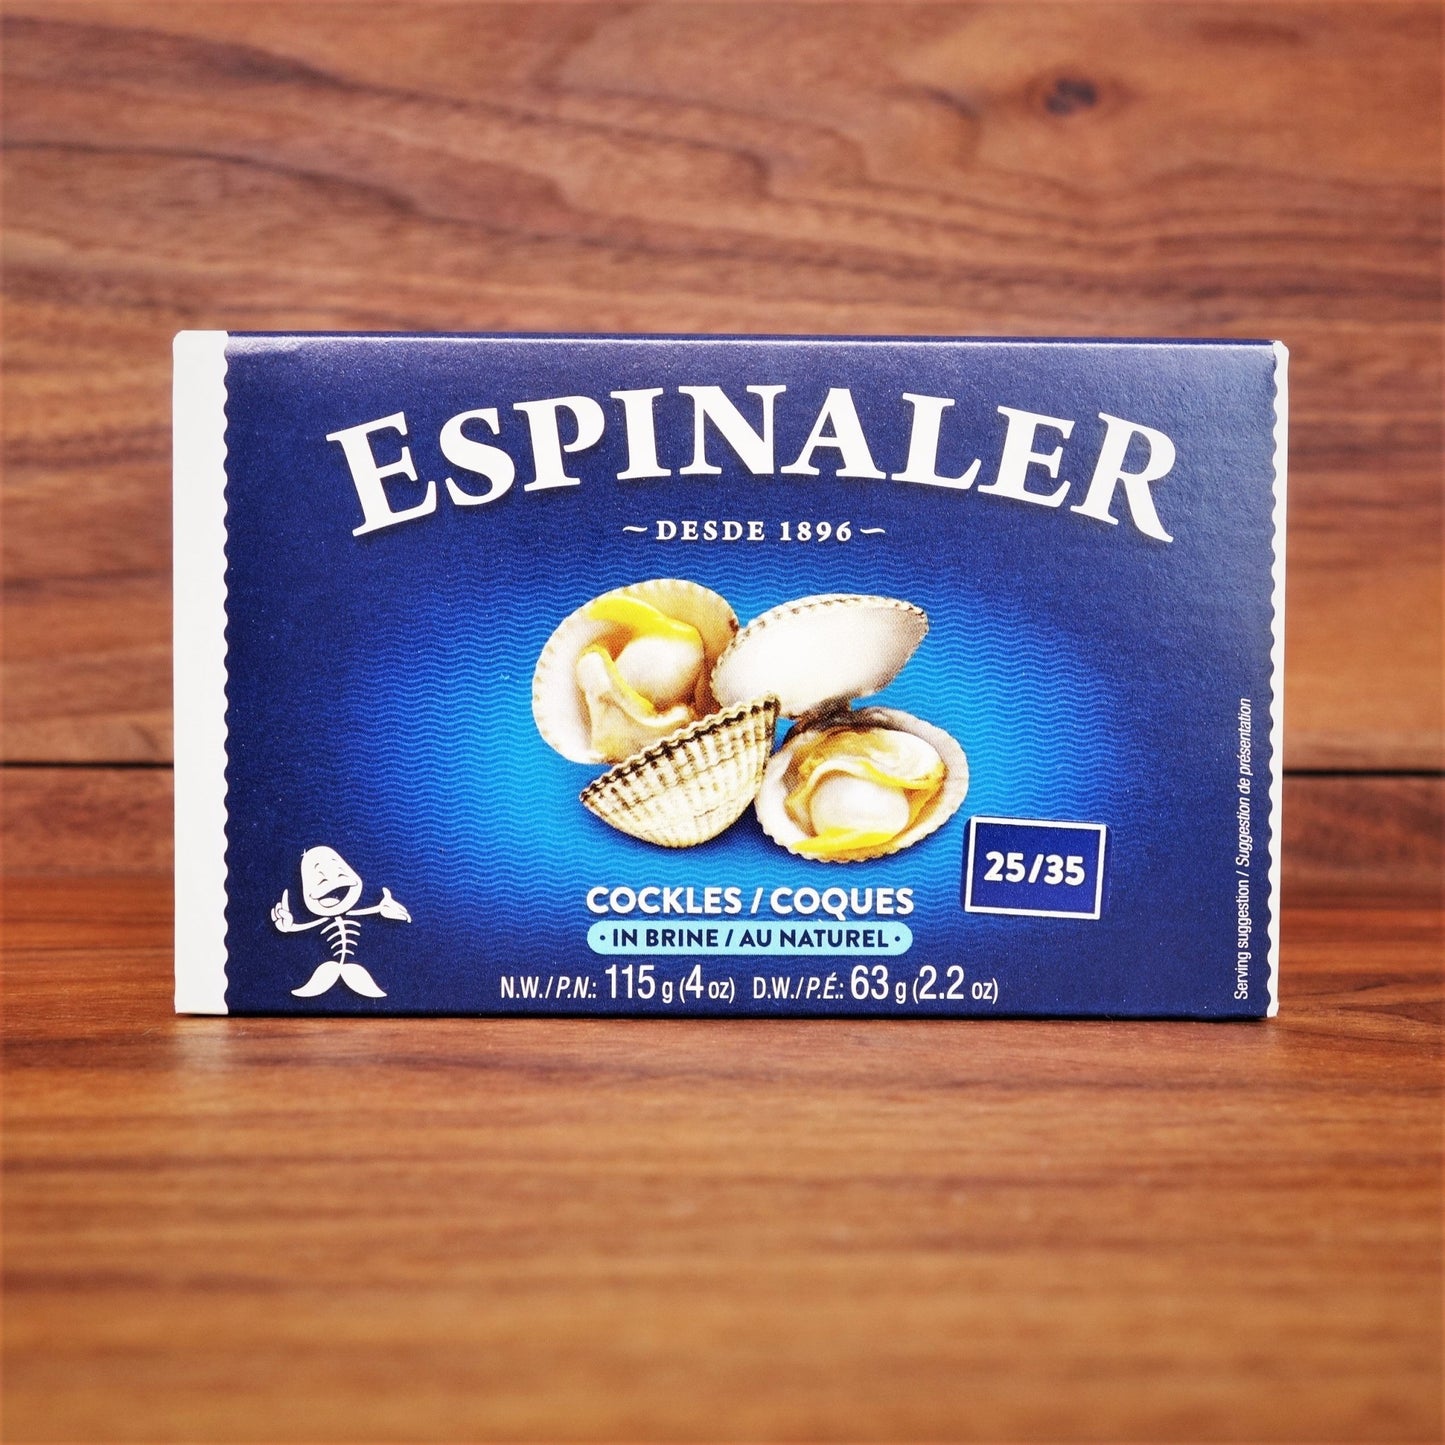 Espinaler Cockles 25/35 classic line - Mongers' Provisions